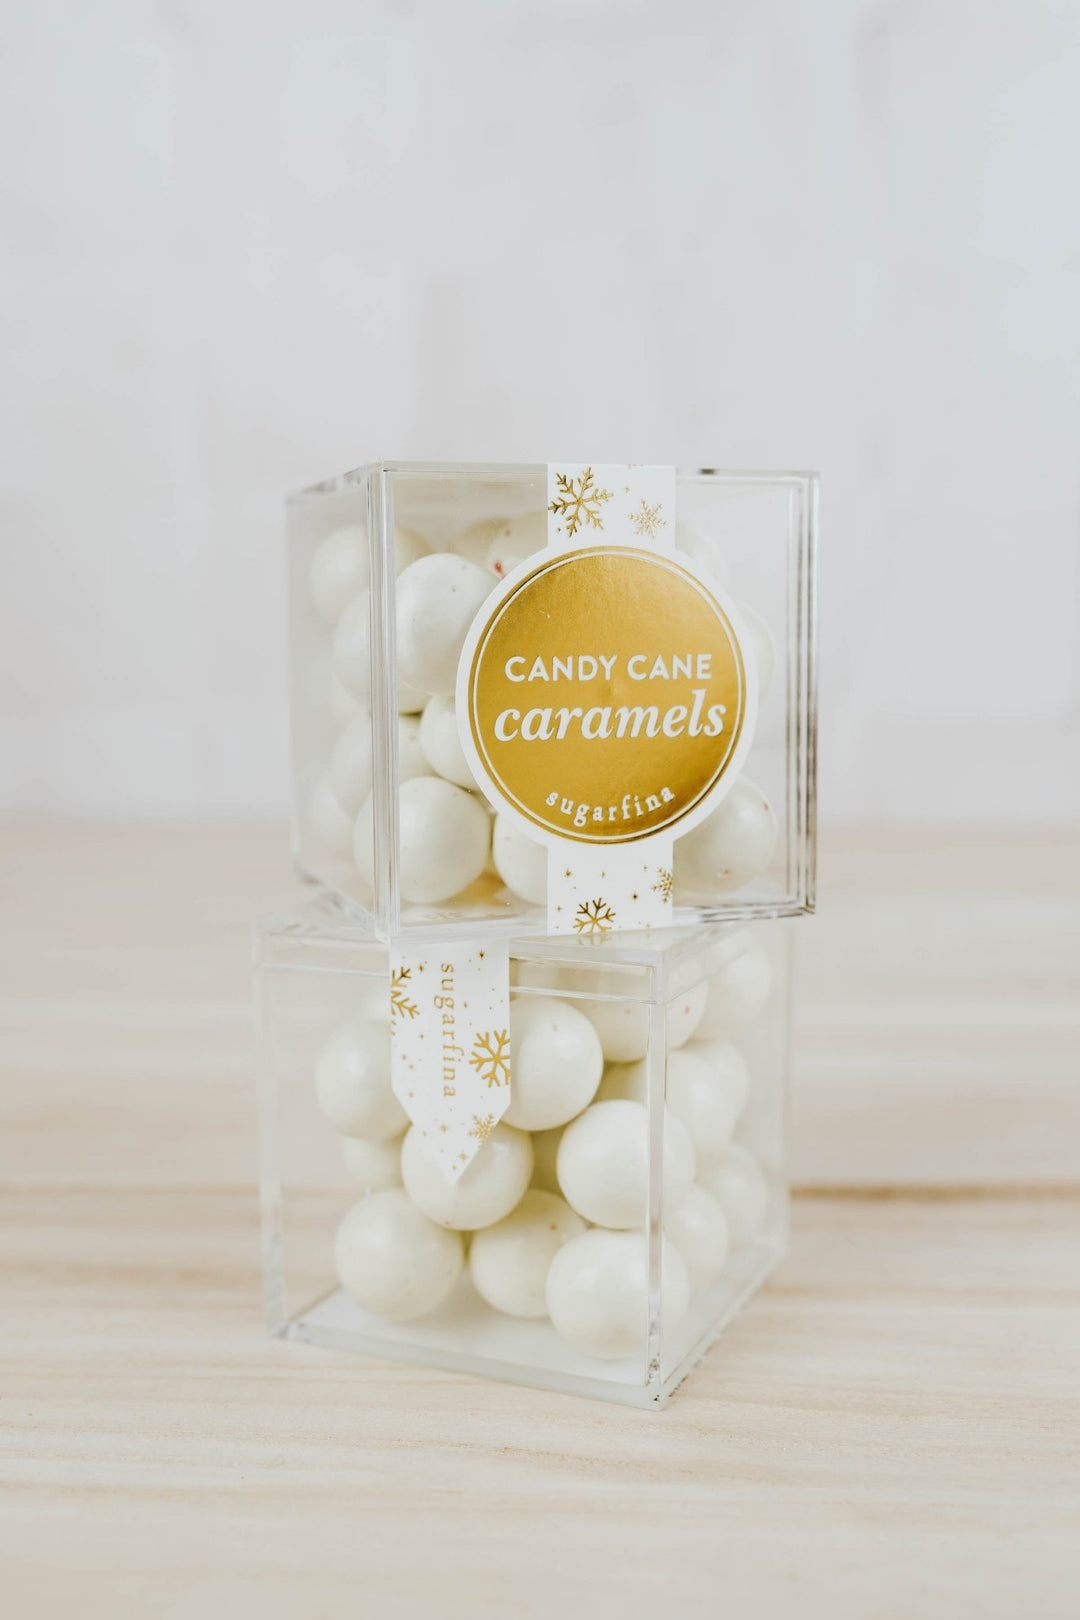 Candy Cane Caramels - Heyday